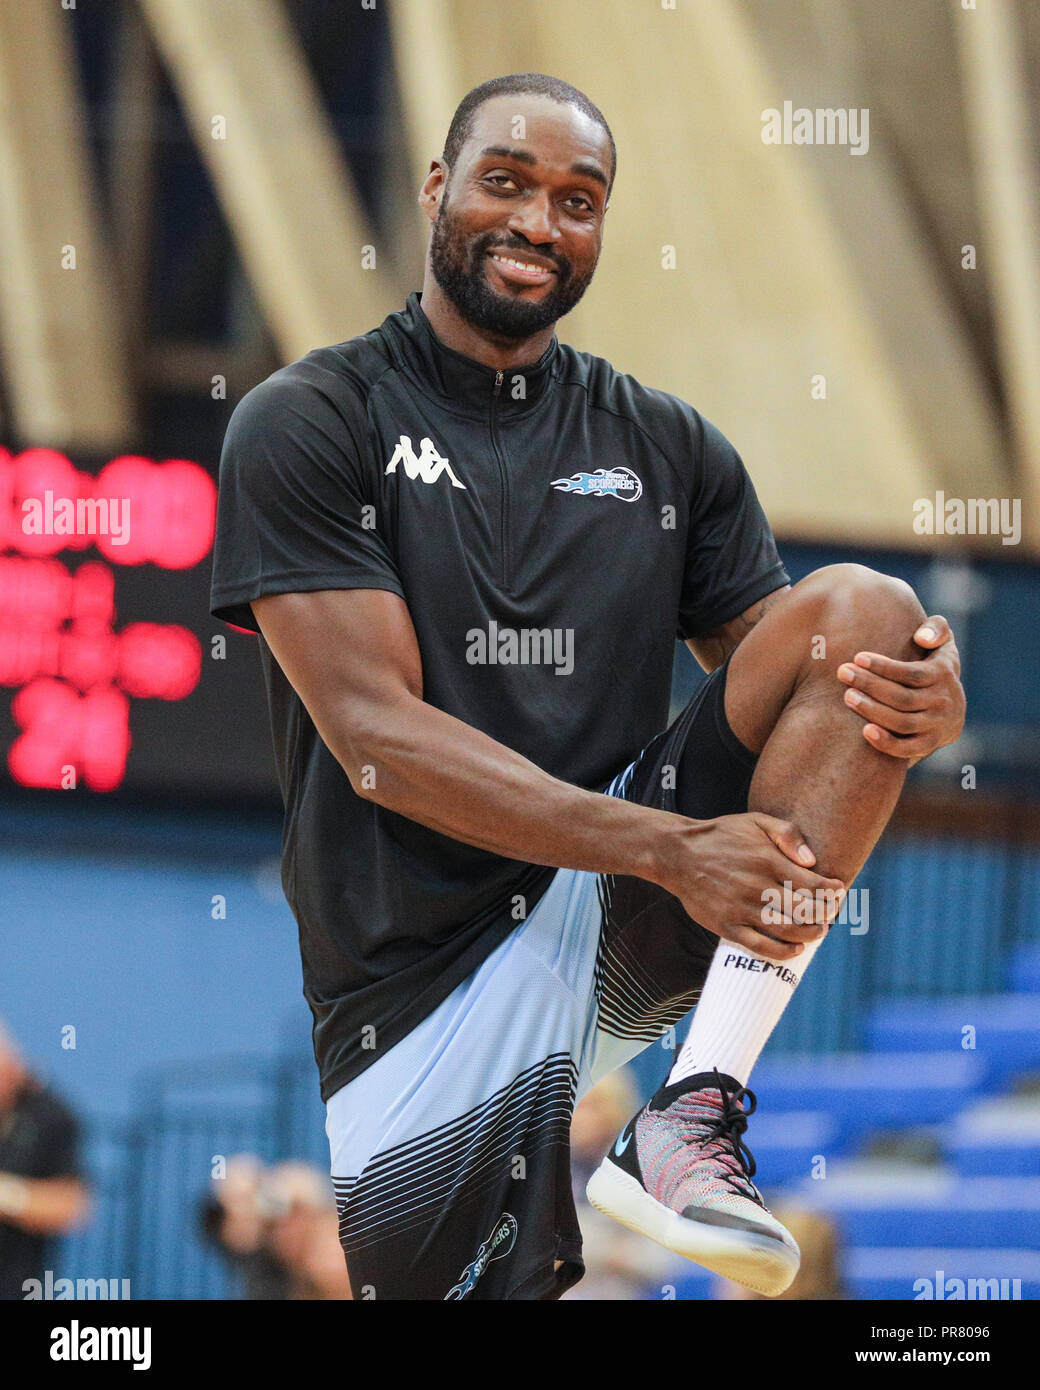 Crystal Palace, London, 29th Sep 2018. Tayo Ogedengbe, Surrey captain. New British Basketball League (BBL) team London City Royals win their debut home game 91:85 v Surrey Scorchers at the National Sports Centre in Crystal Palace, Southeast London. Credit: Imageplotter News and Sports/Alamy Live News Stock Photo